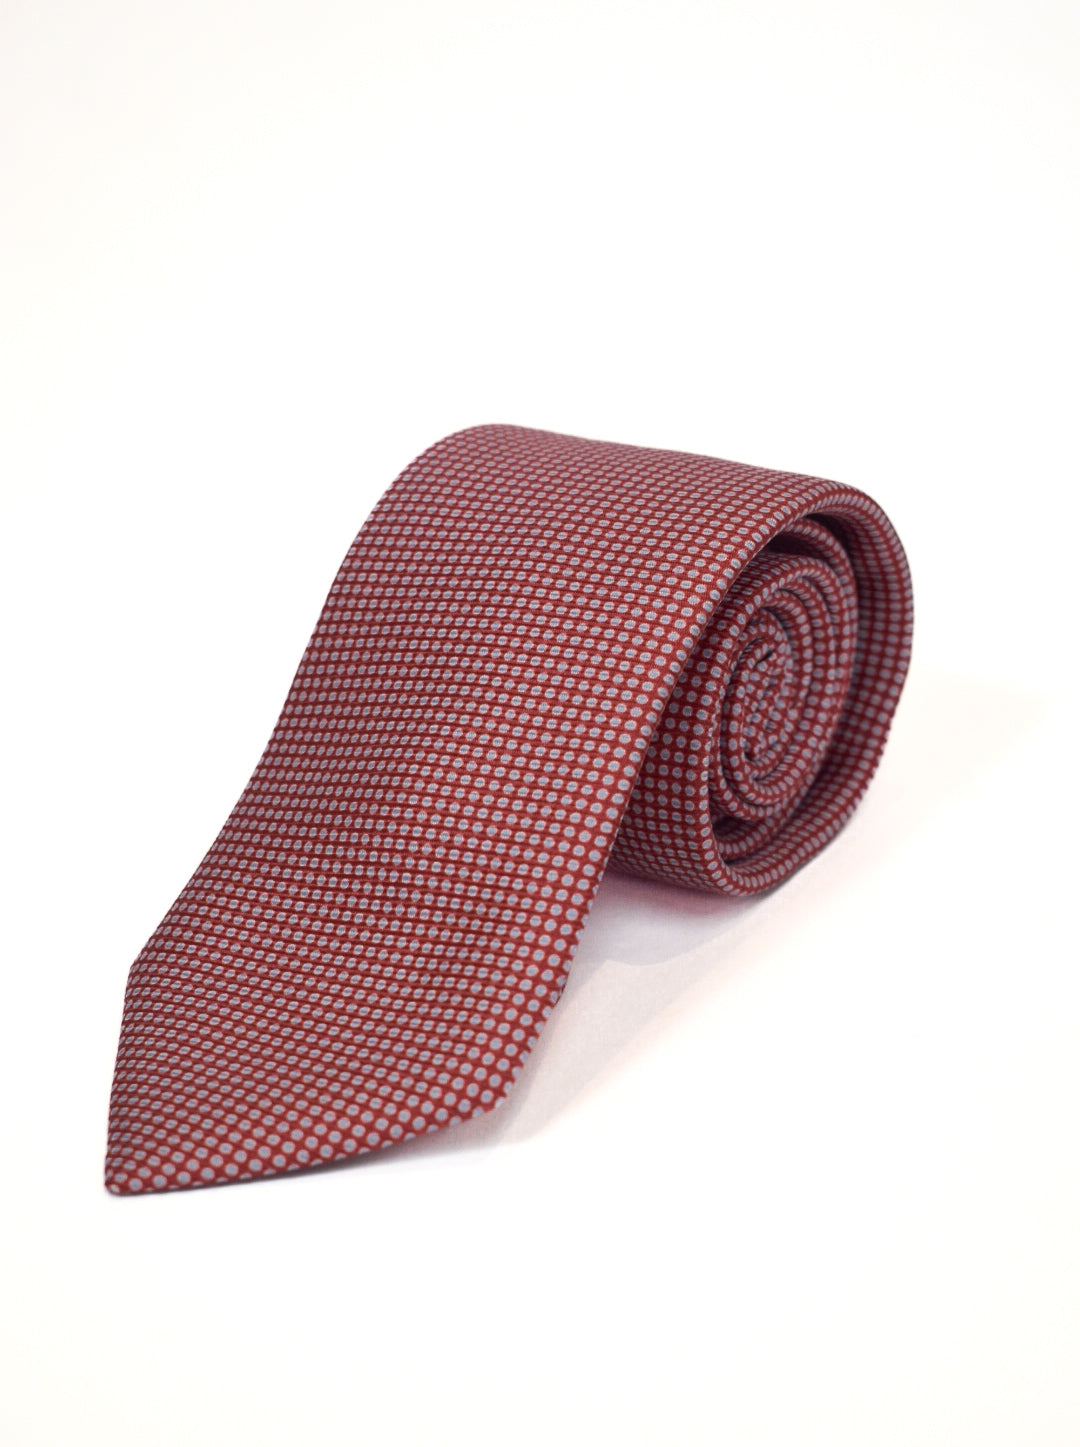 Liam John Dotted Tie